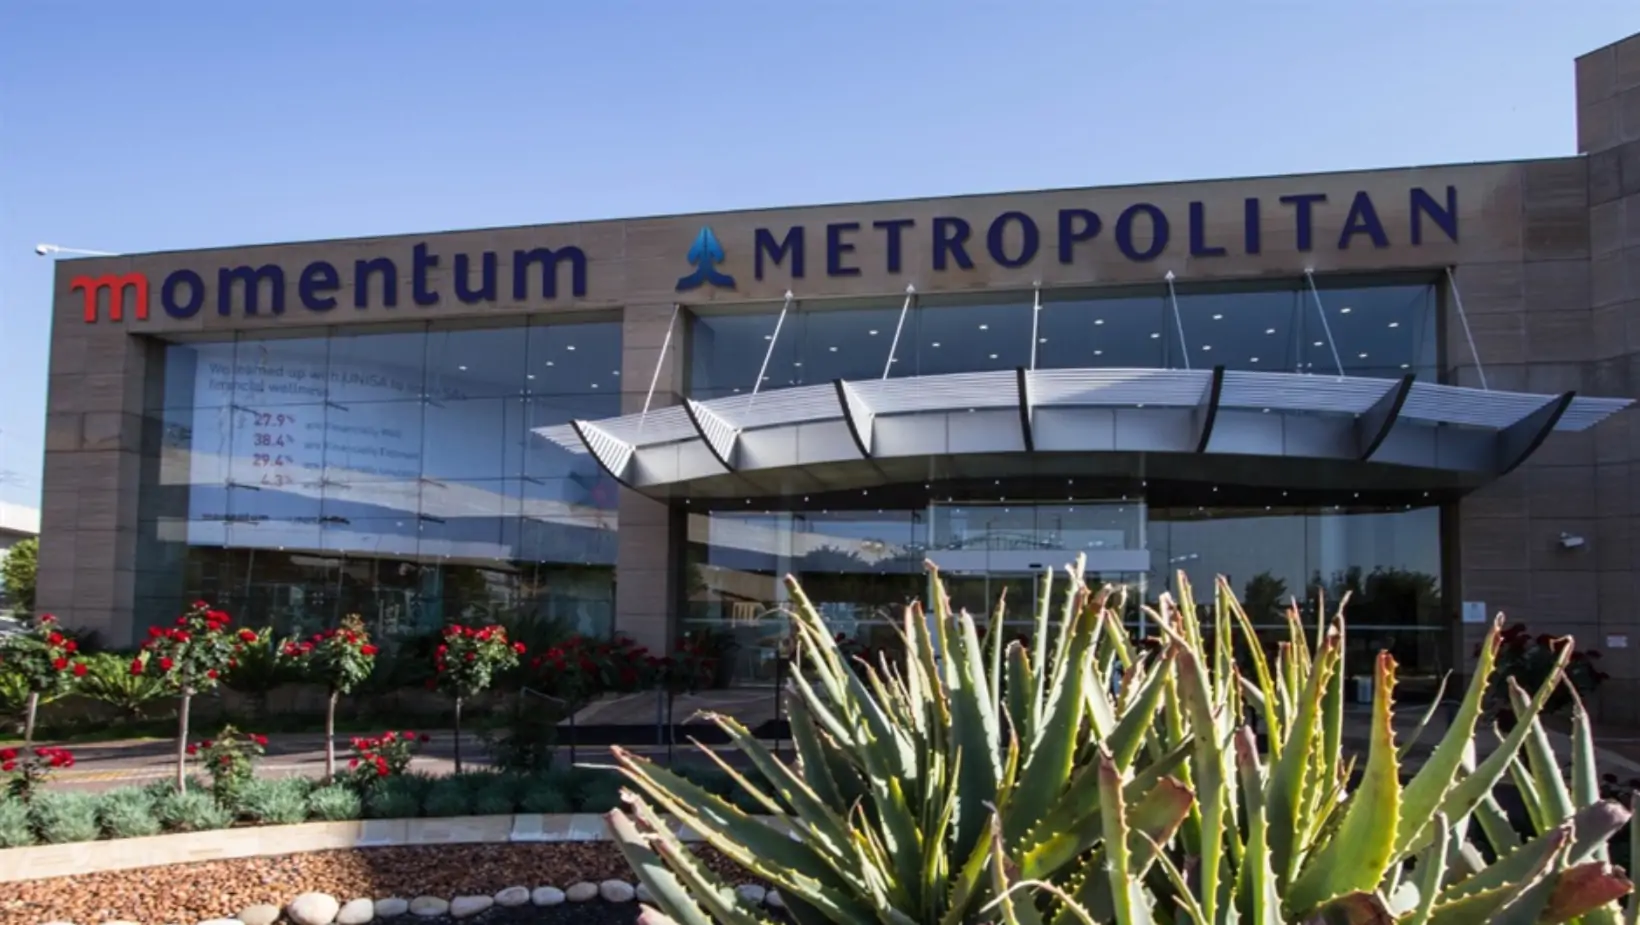 Momentum Metropolitan Surges with Strong Financial Performance and Strategic Initiatives